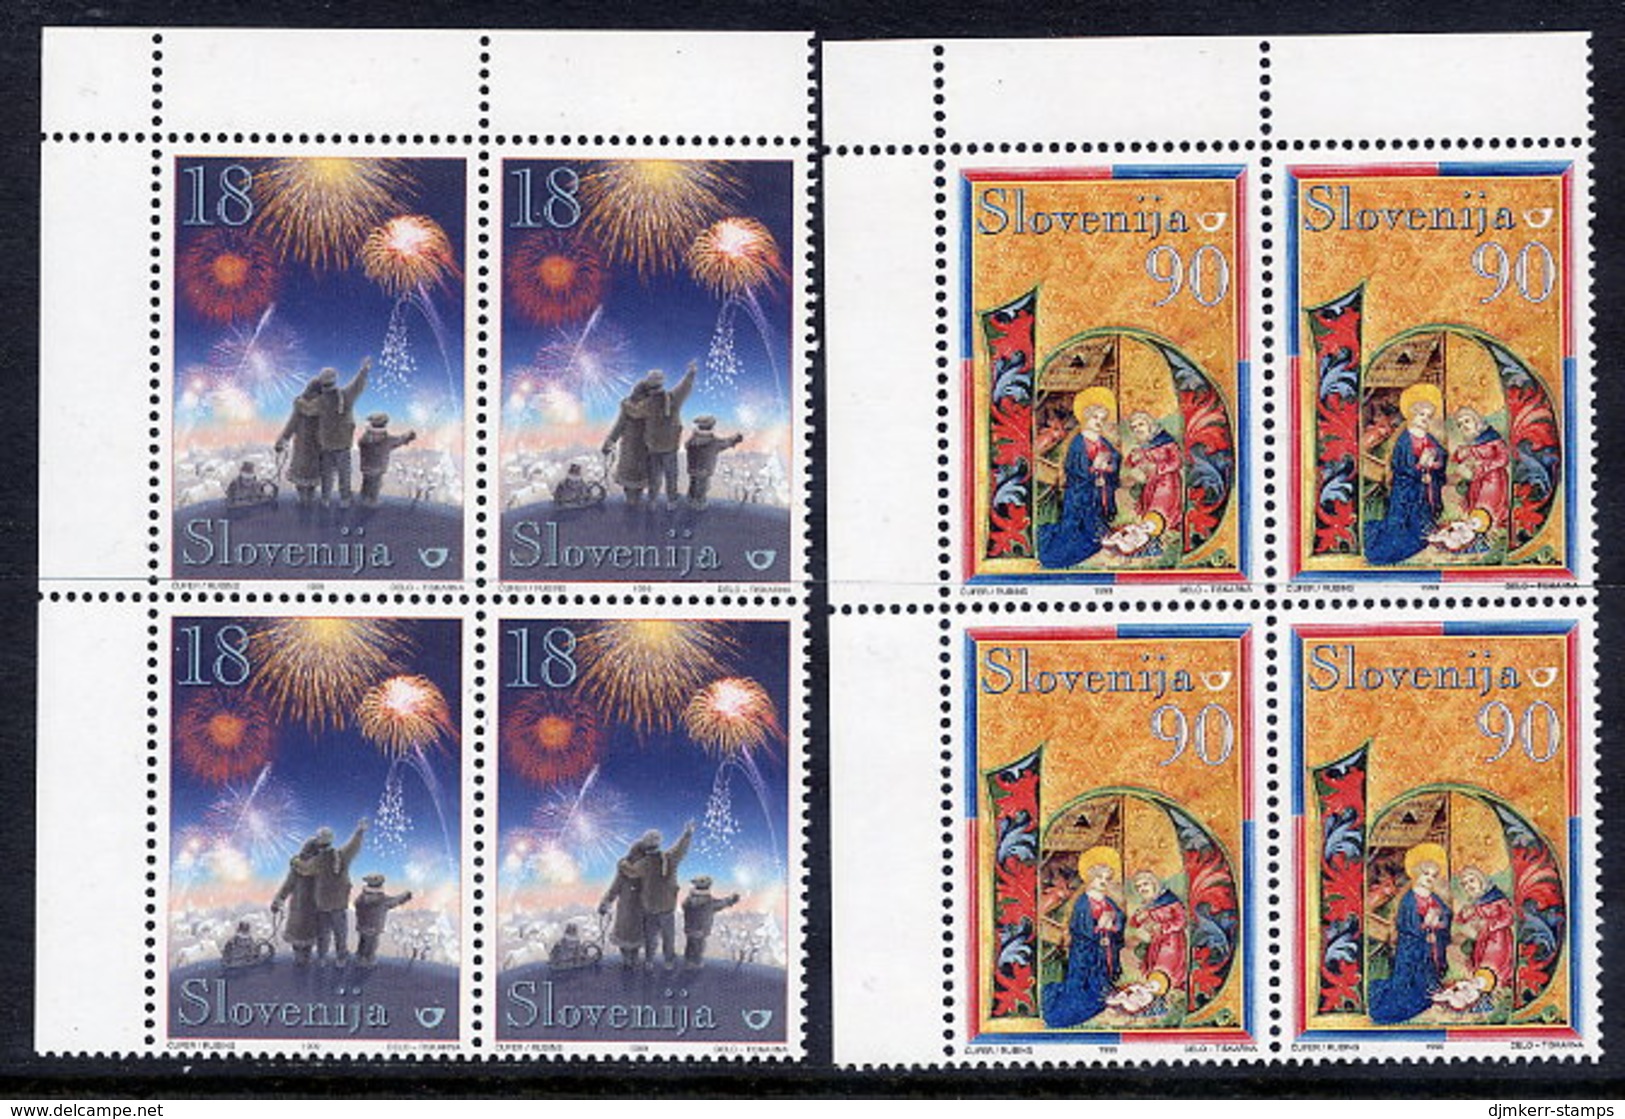 SLOVENIA 1999 Christmas 18 T. And 90 T. From Sheets Blocks Of 4 MNH / **.  Michel 277, 279 - Eslovenia